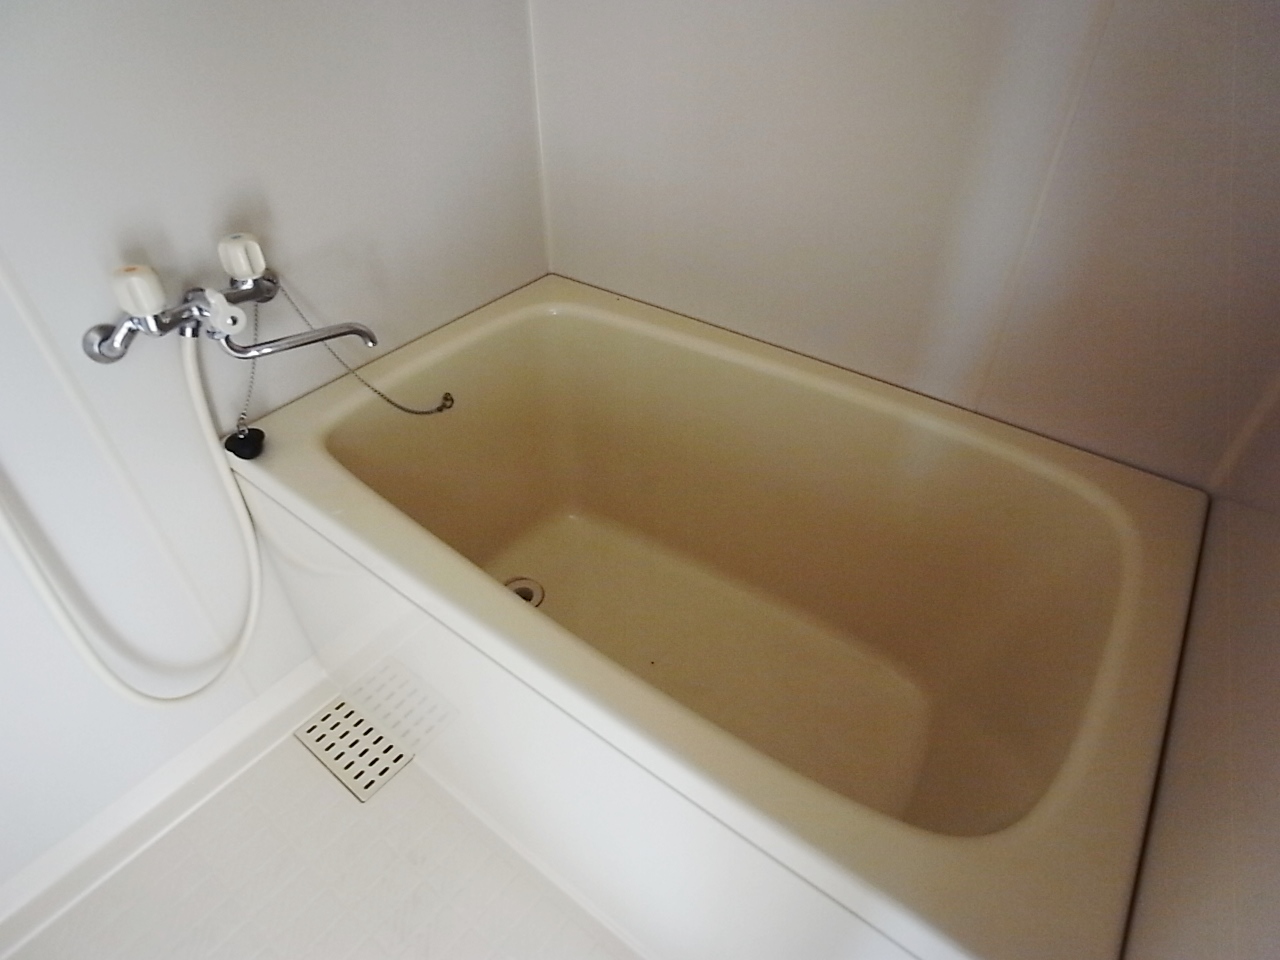 Bath. It is a toilet with a clean ☆ 